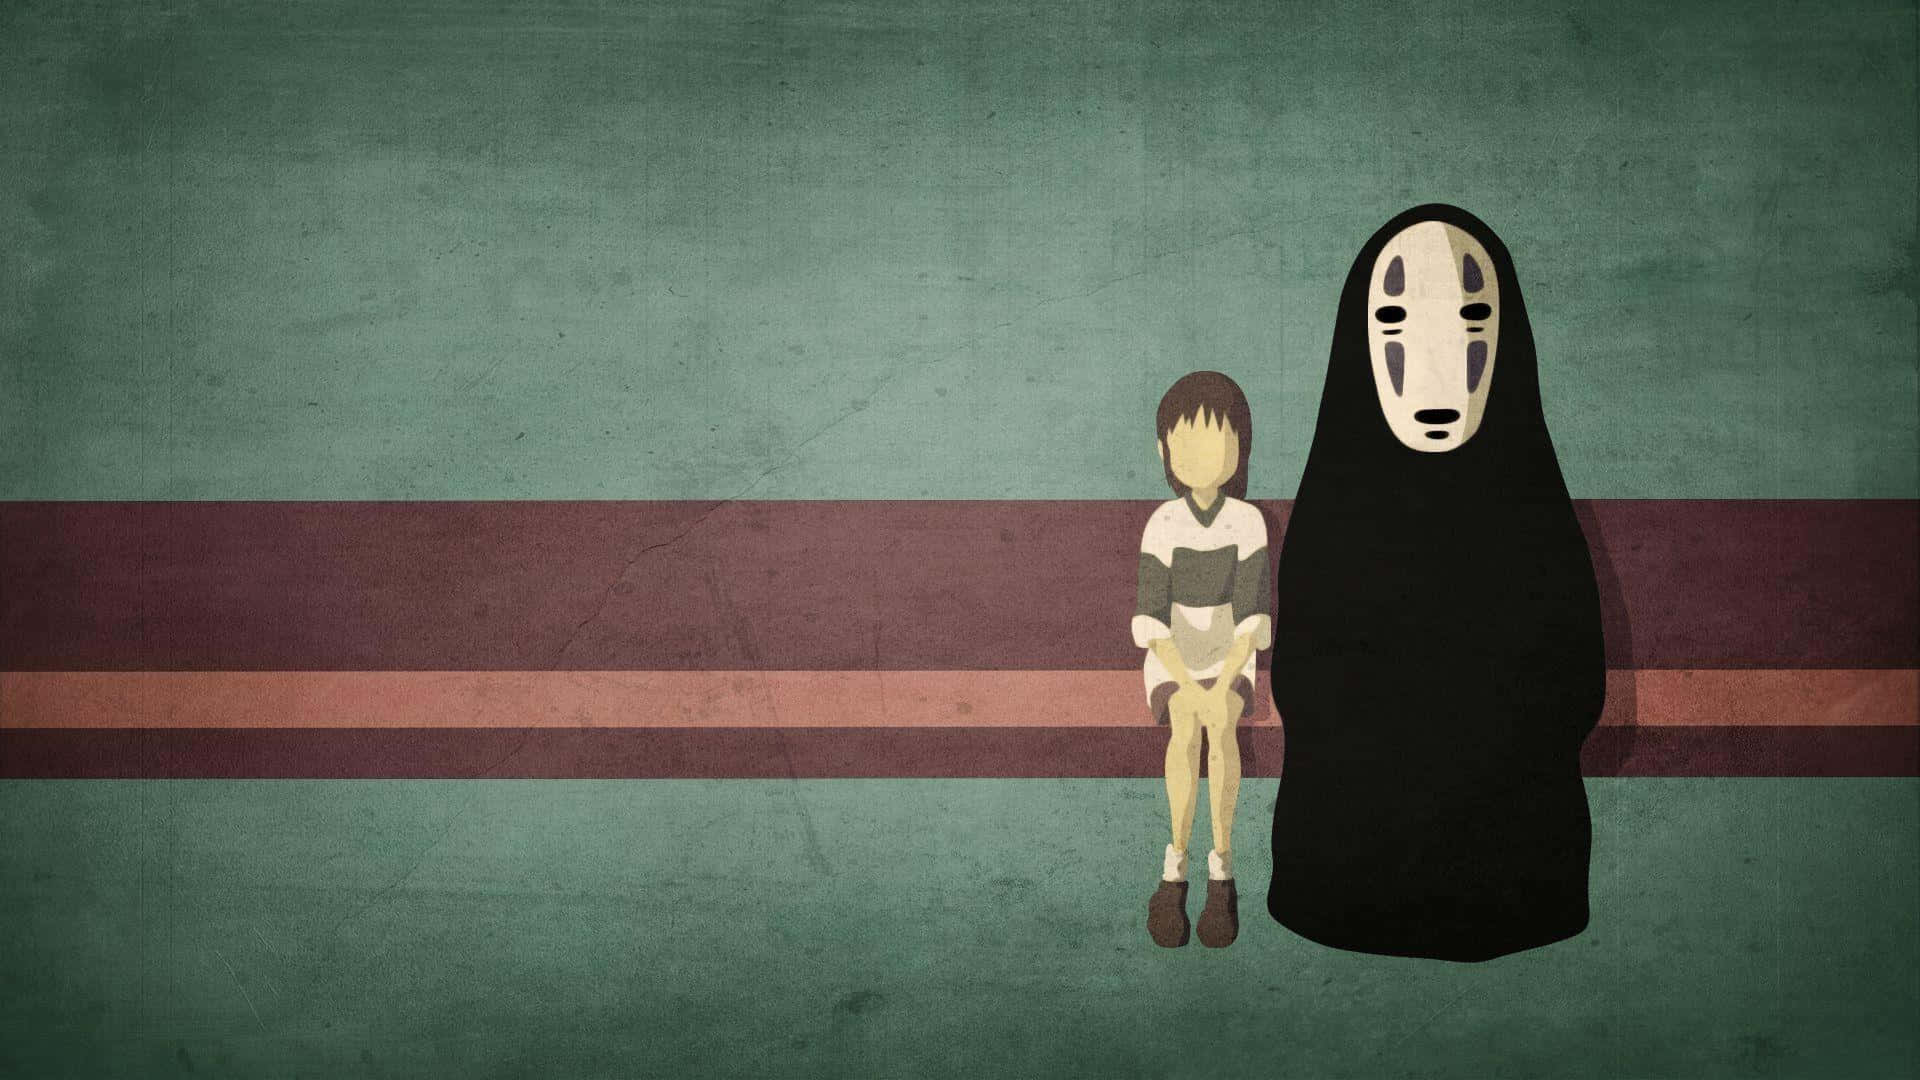 Chihiroand No Face Illustration Wallpaper